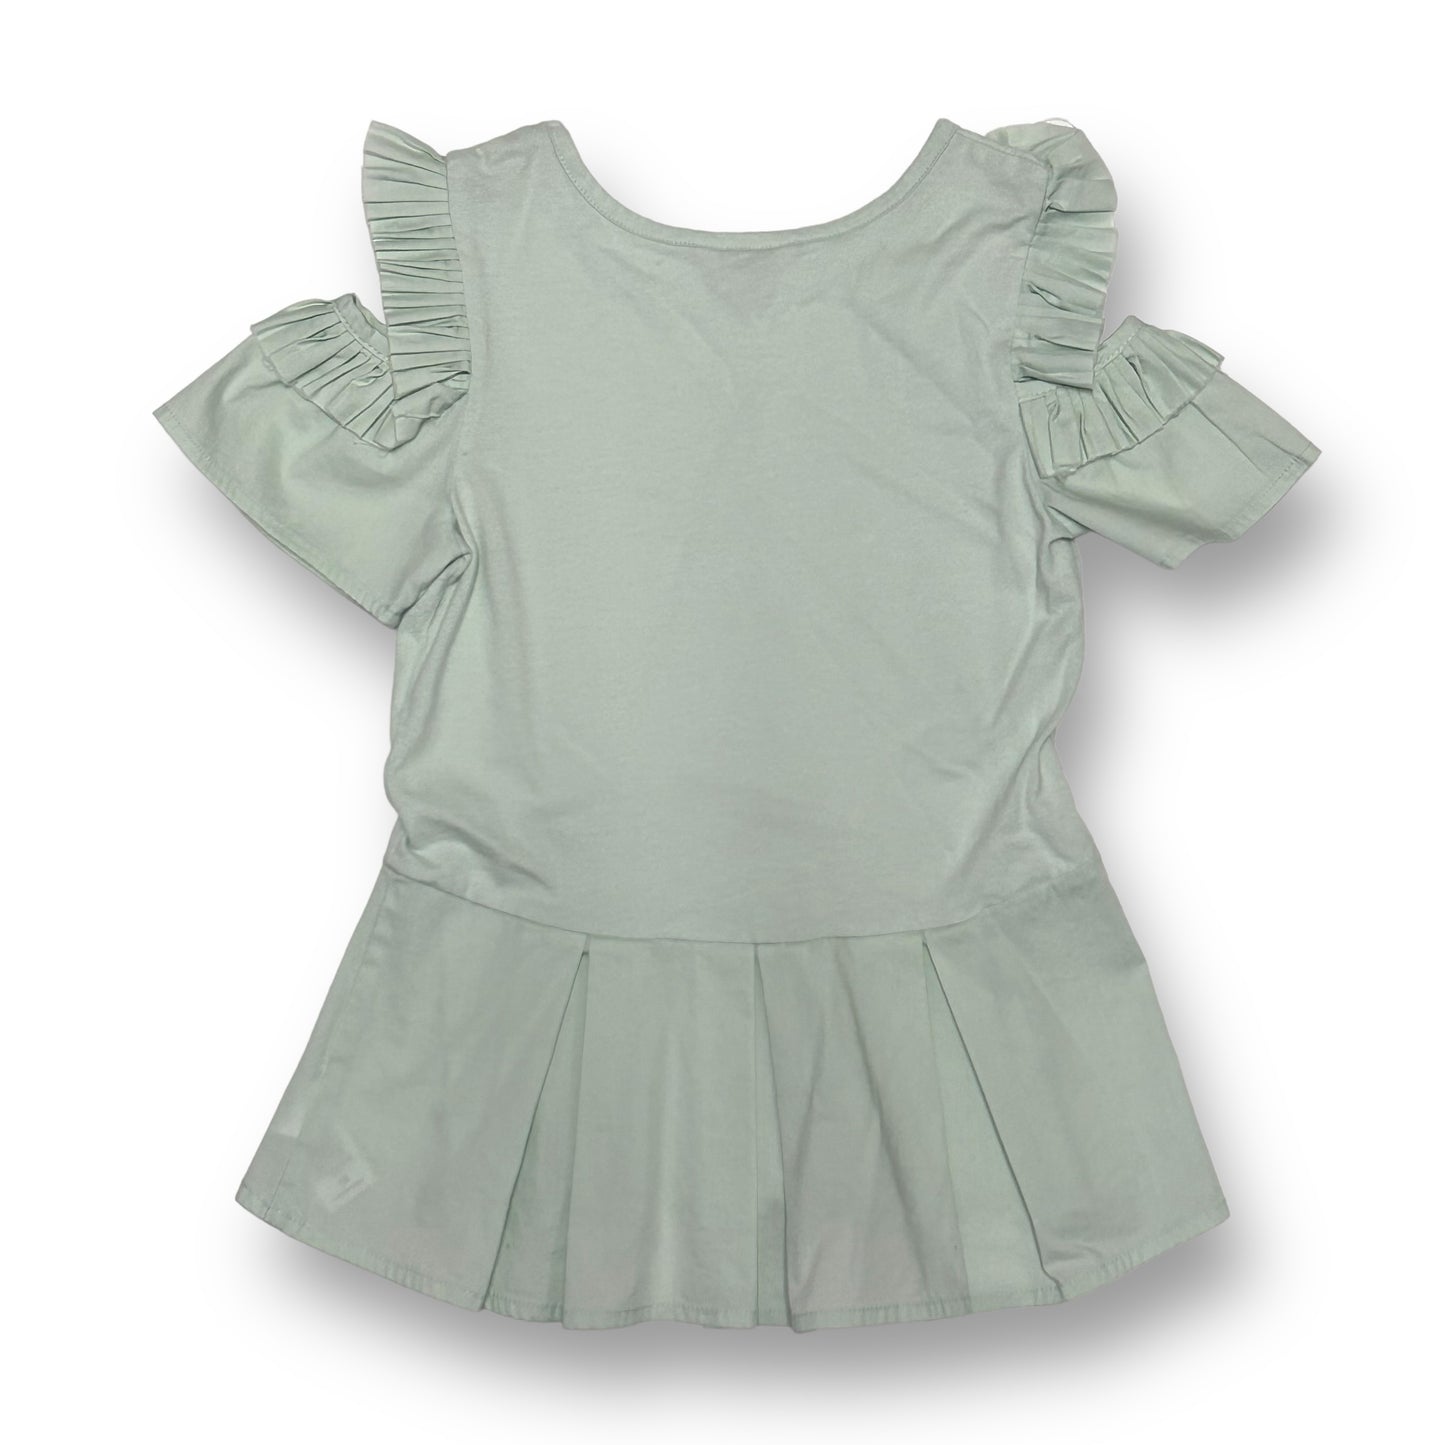 Girls Habitual Girl Size 10/12 Light Sage Green Pleated Ruffle Boutique Blouse